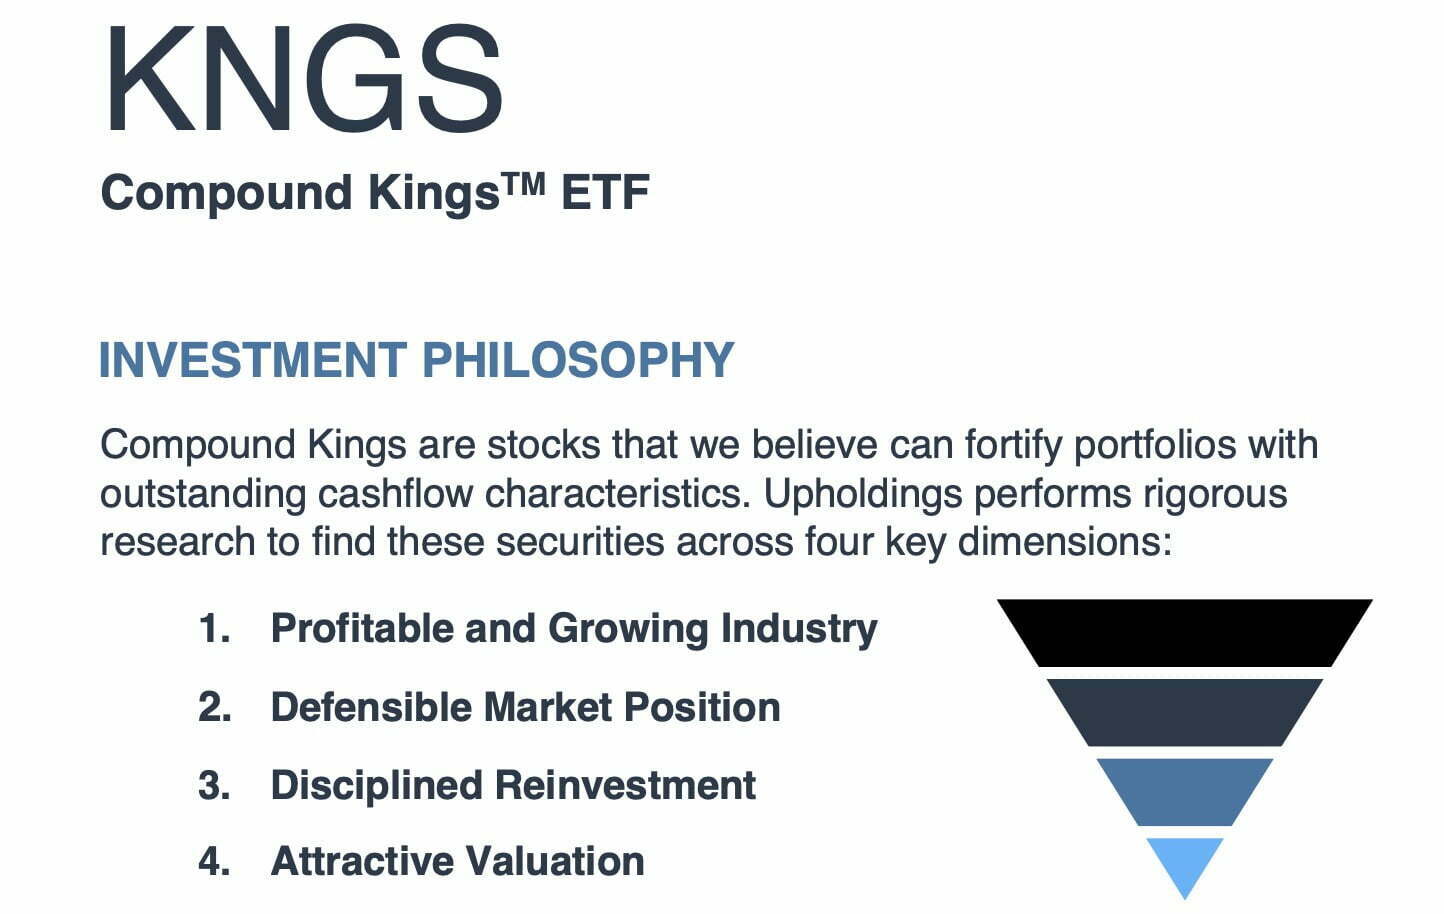 Upholdings Compound Kings ETF KNGS investment philosophy of finding profitable and growing industries, defensible market positions, disciplined reinvestments and attractive valuations 